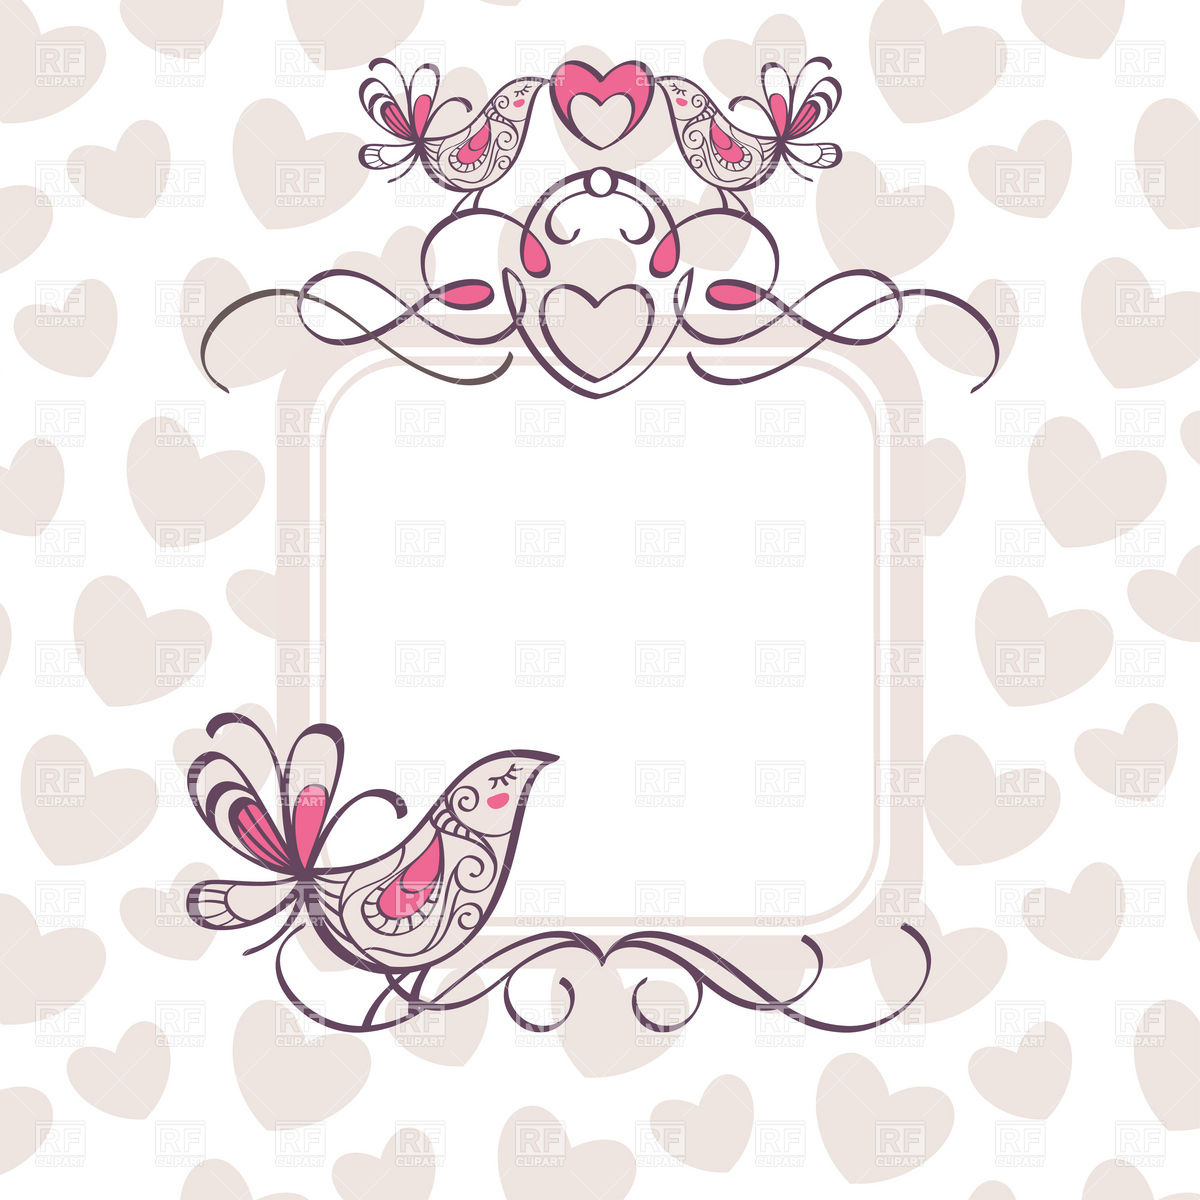 Free Wedding Borders and Frames Hearts